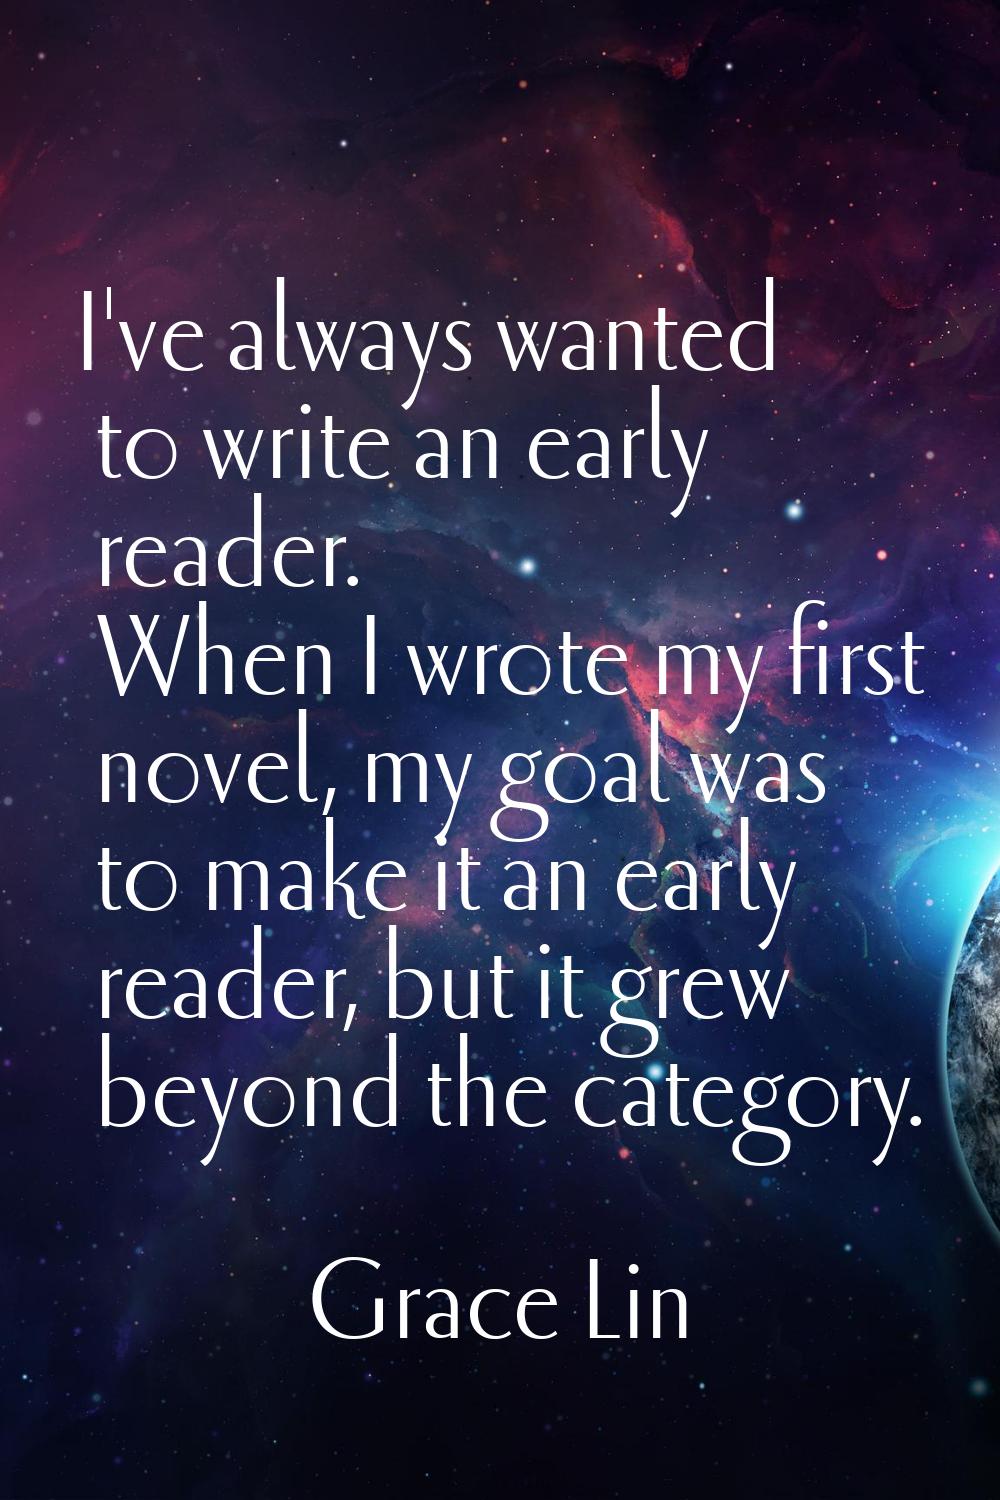 I've always wanted to write an early reader. When I wrote my first novel, my goal was to make it an